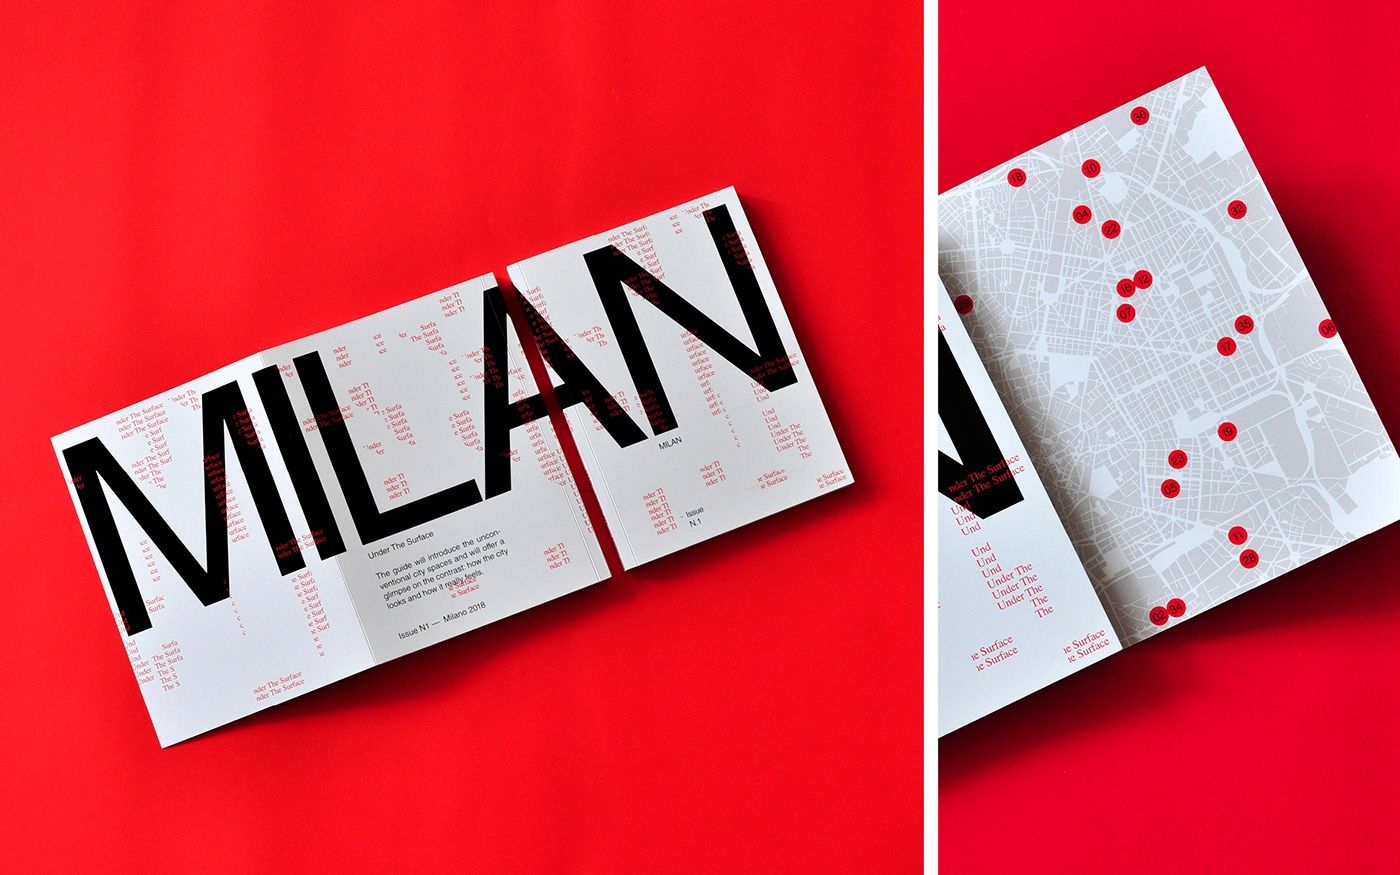 graphic design  book Guide print milano Travel surface typography   type